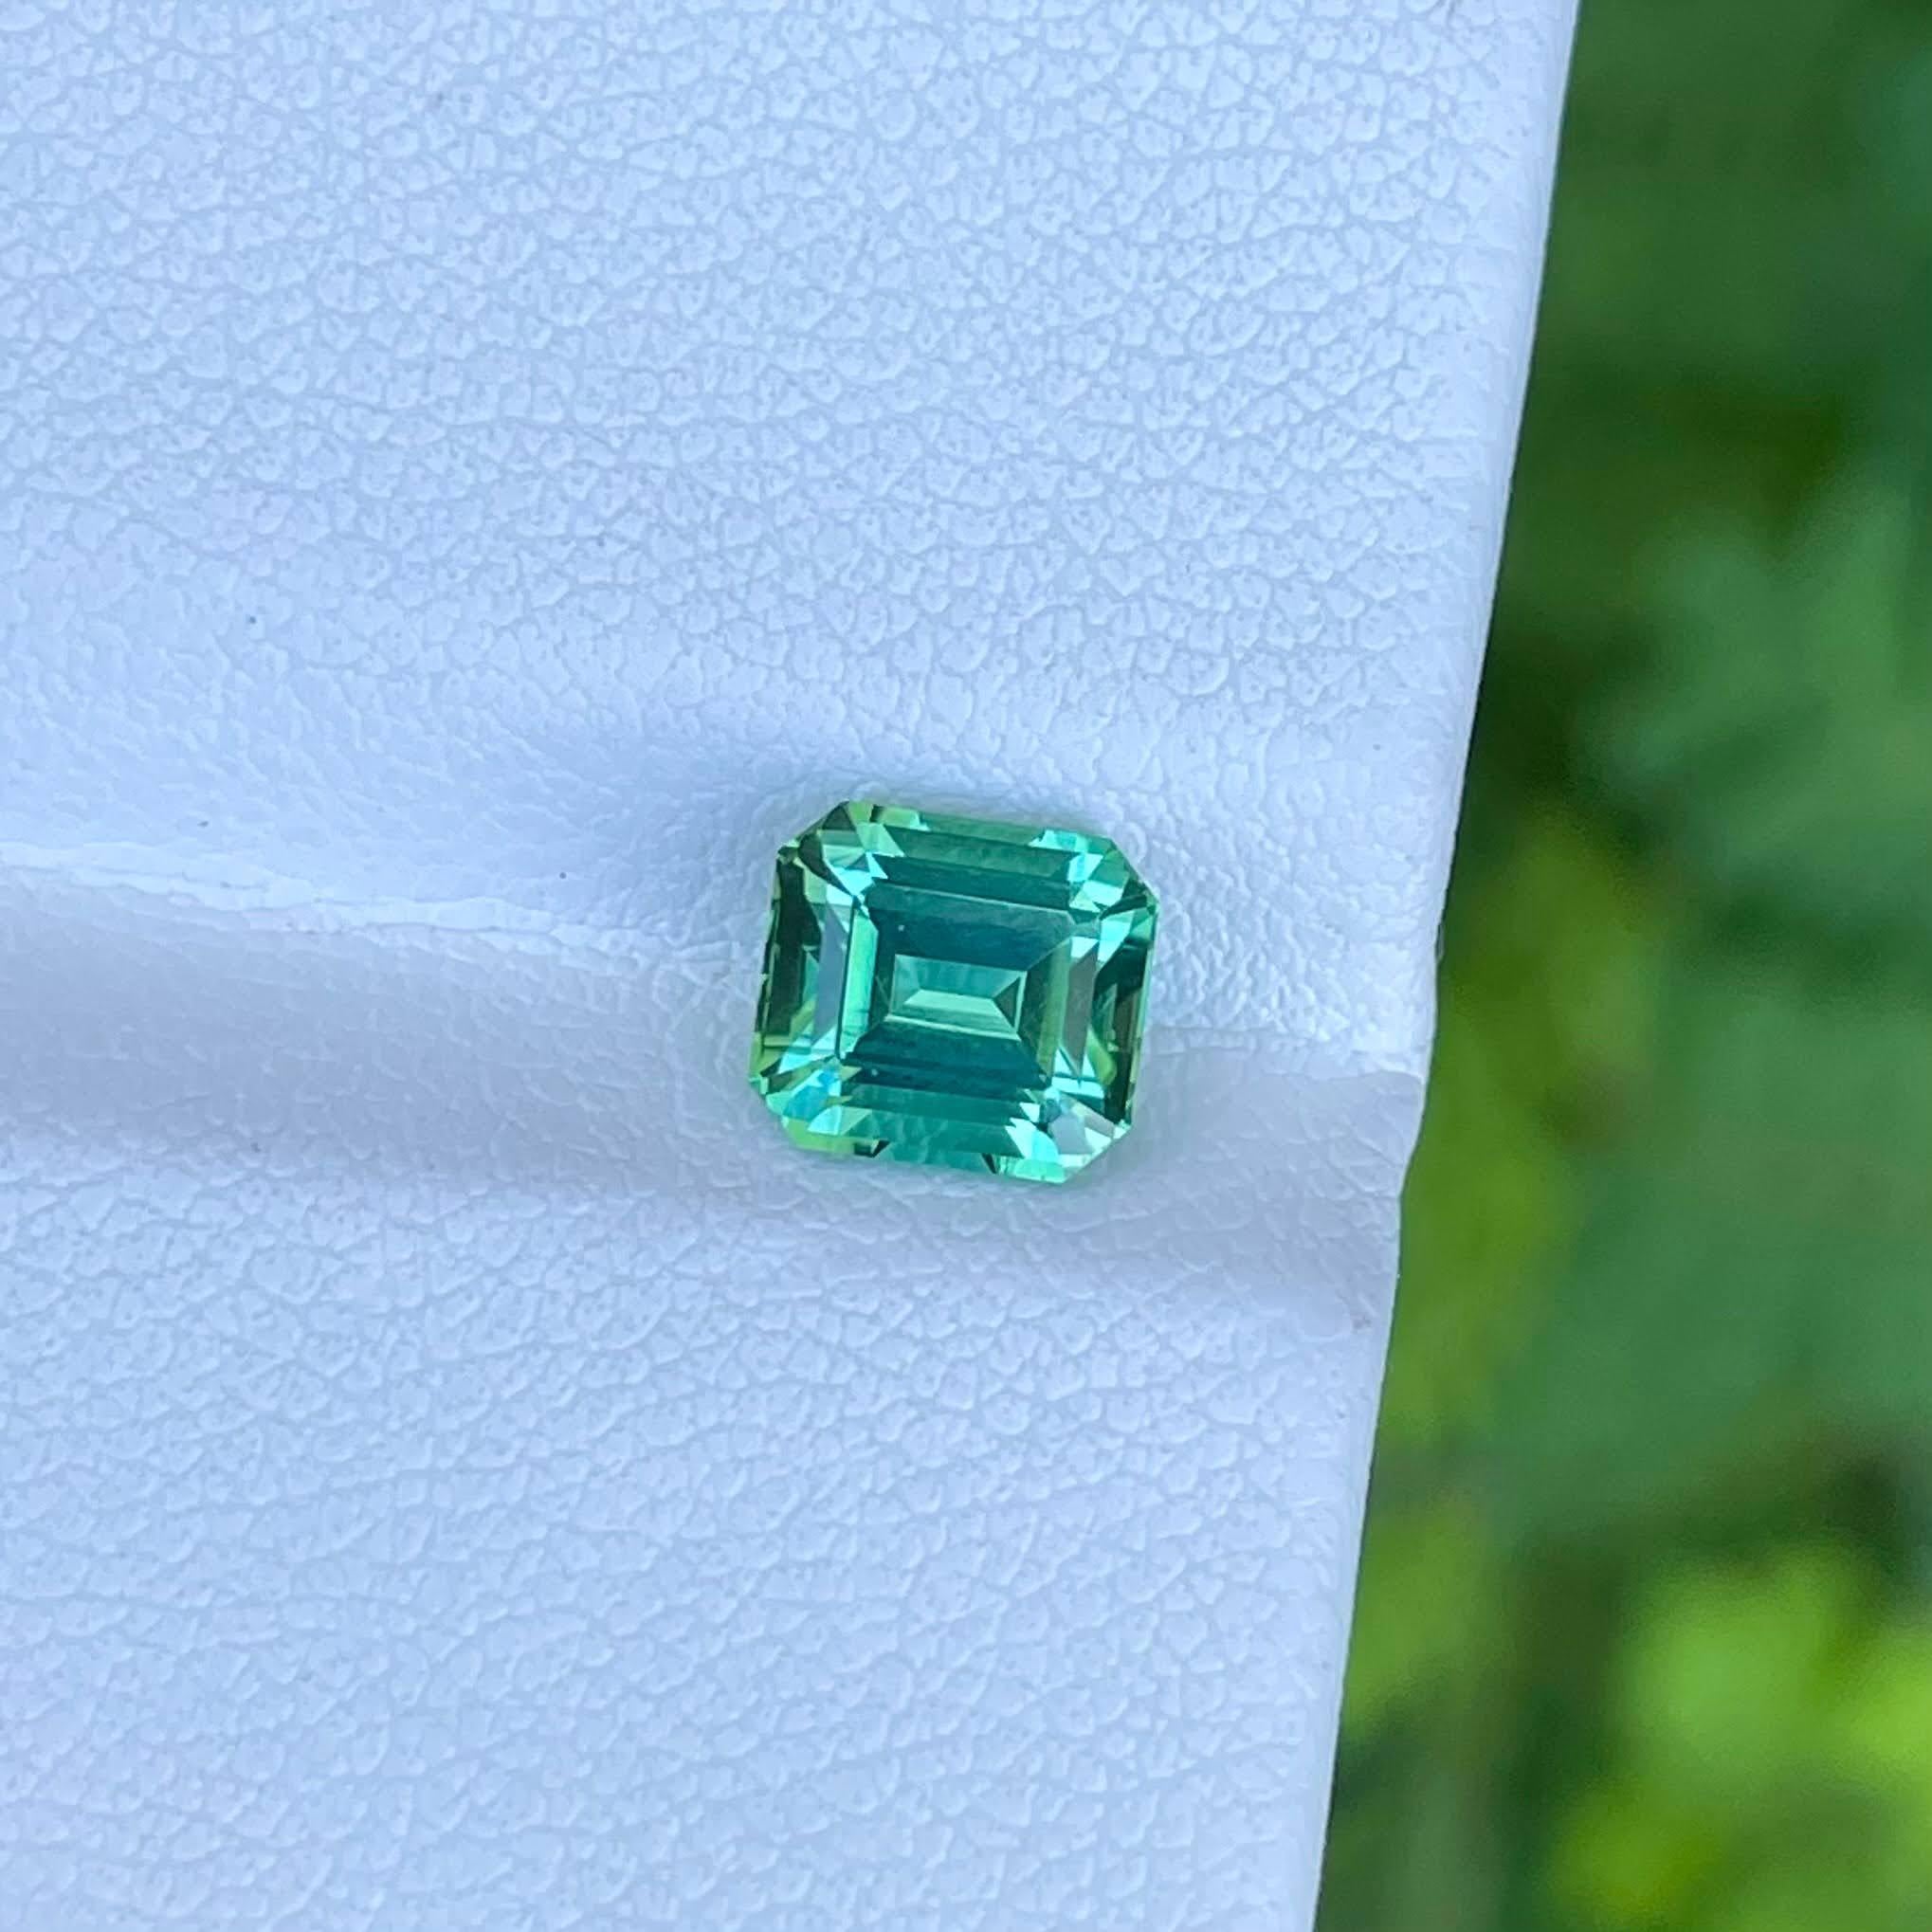 1.50 carats 
6.68x6.02x7.68 mm
Clarity Eye Clean
Treatment None
Origin Afghanistan
Shape Octagon
Cut Step Emerald




Nestled within the rugged beauty of Afghanistan, a mesmerizing gemstone emerges a bluish-green Tourmaline of 1.50 carats,